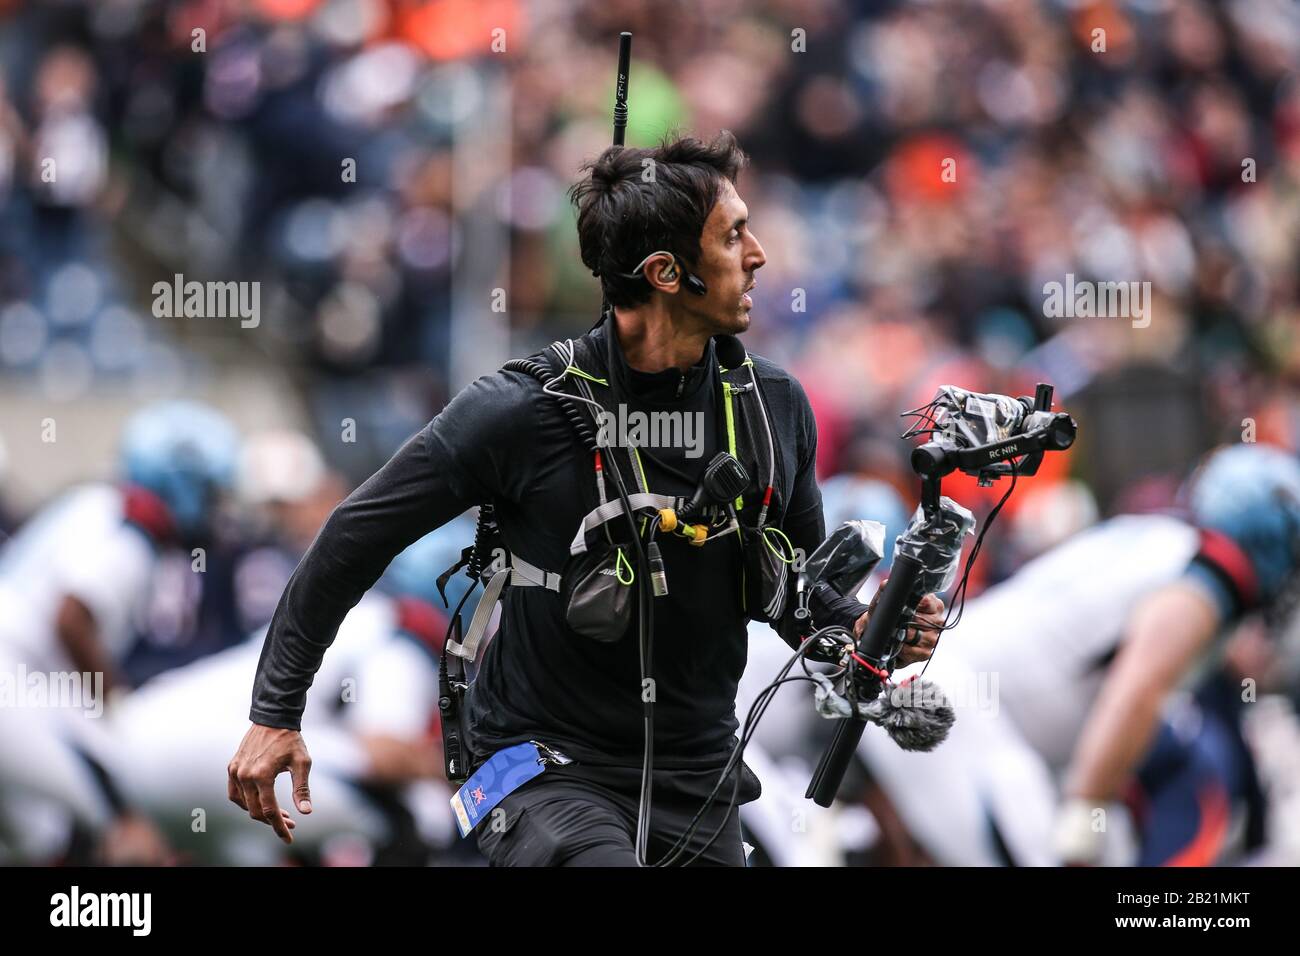 during first quarter of an XFL football game, Saturday, Feb. 22, 2020, in Seattle, Washington, USA. (Photo by IOS/ESPA-Images) Stock Photo